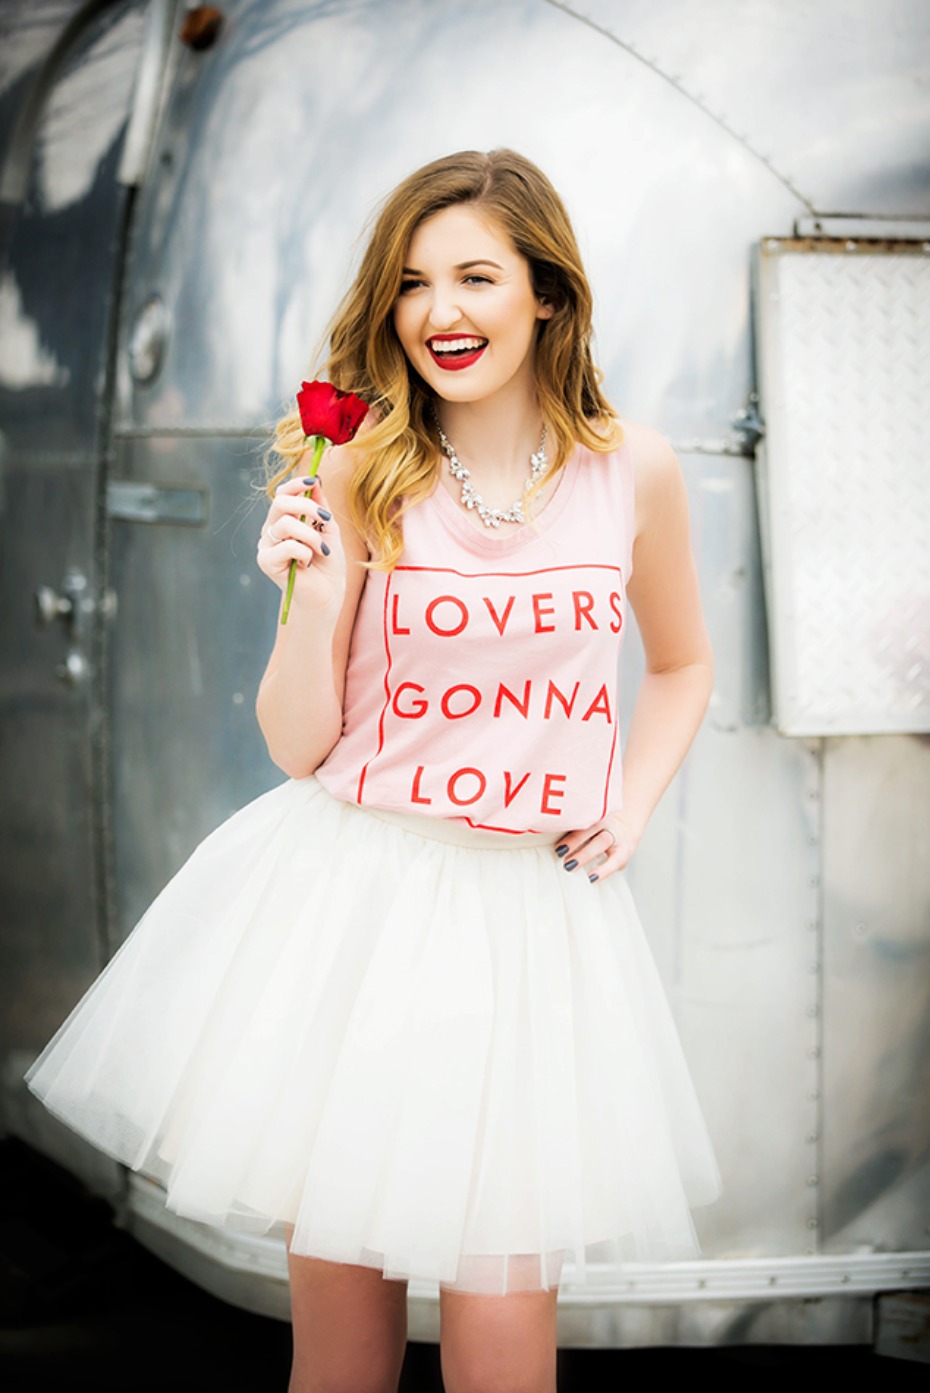 Lovers gonna love this bridal shower outfit from Bliss Tulle